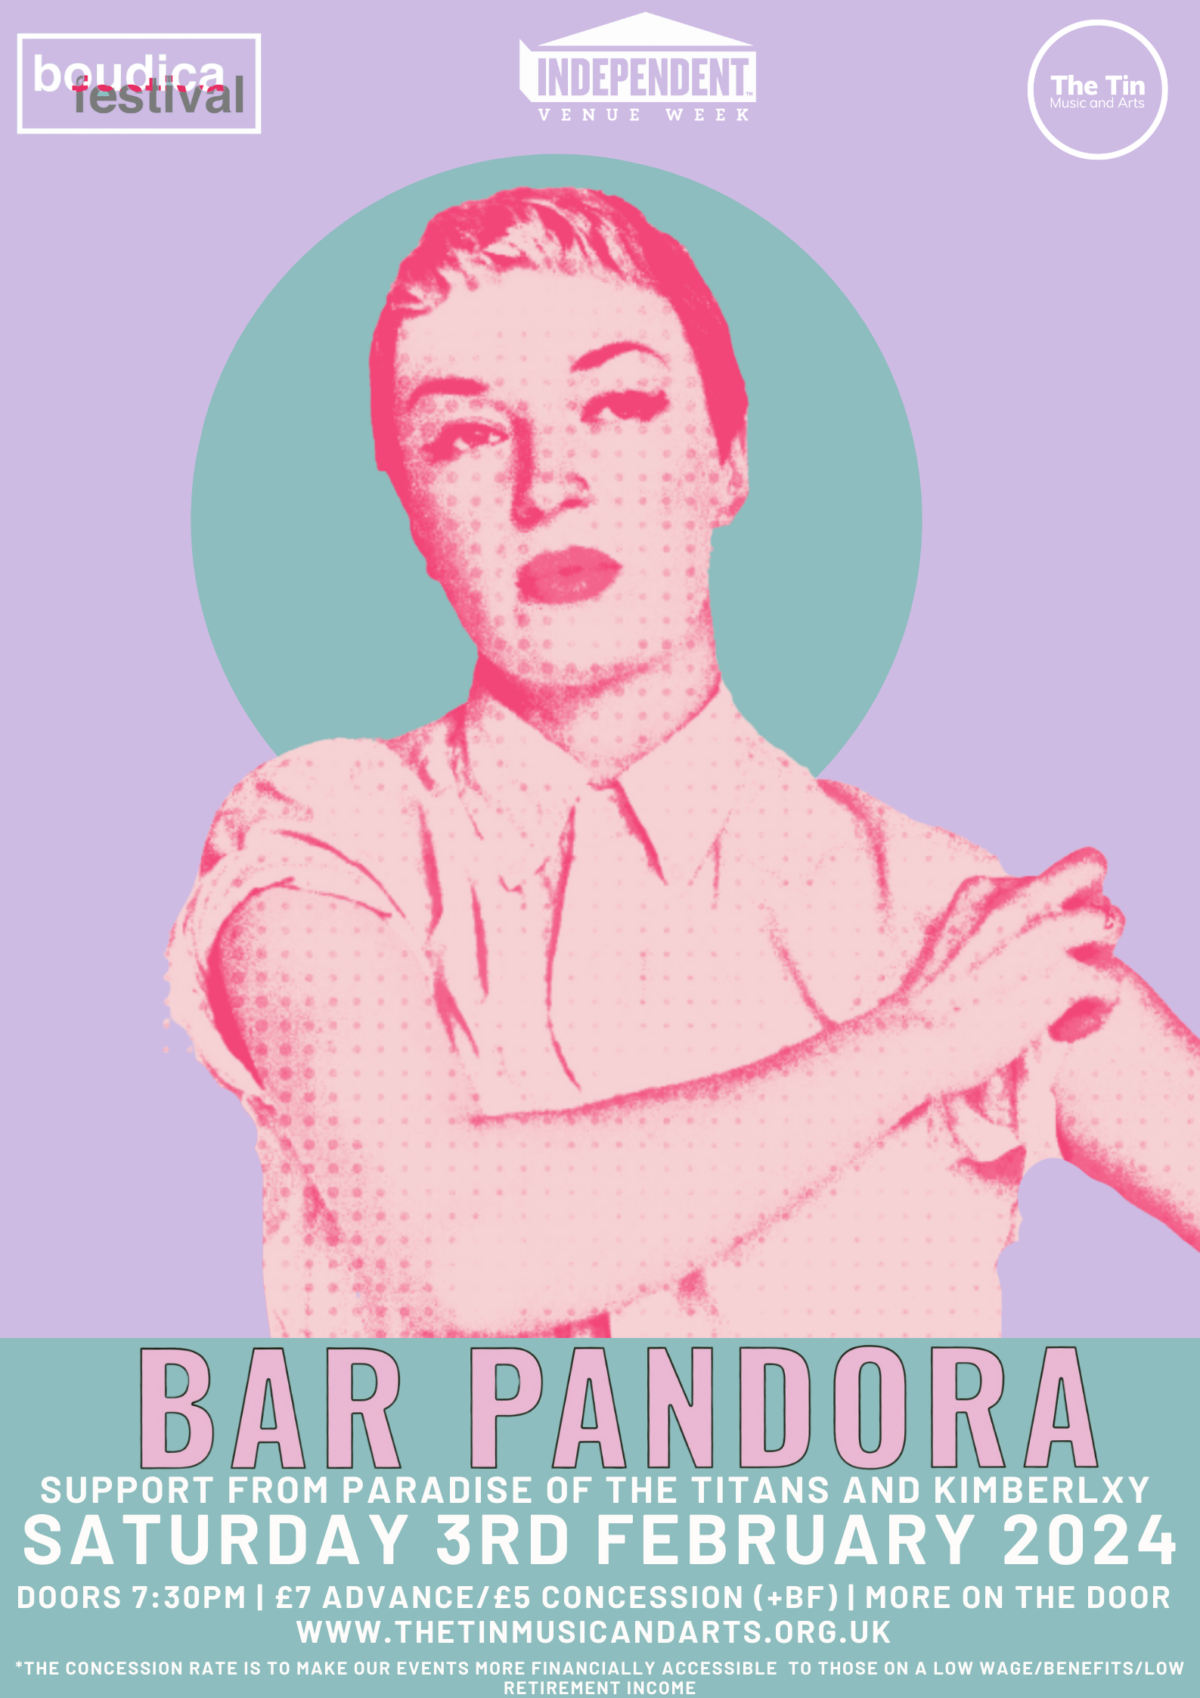 Poster for Bar Pandora at The Tin Music and Arts on Saturday 3rd February 2024. Advance tickets are £7, with concession tickets available for £5.